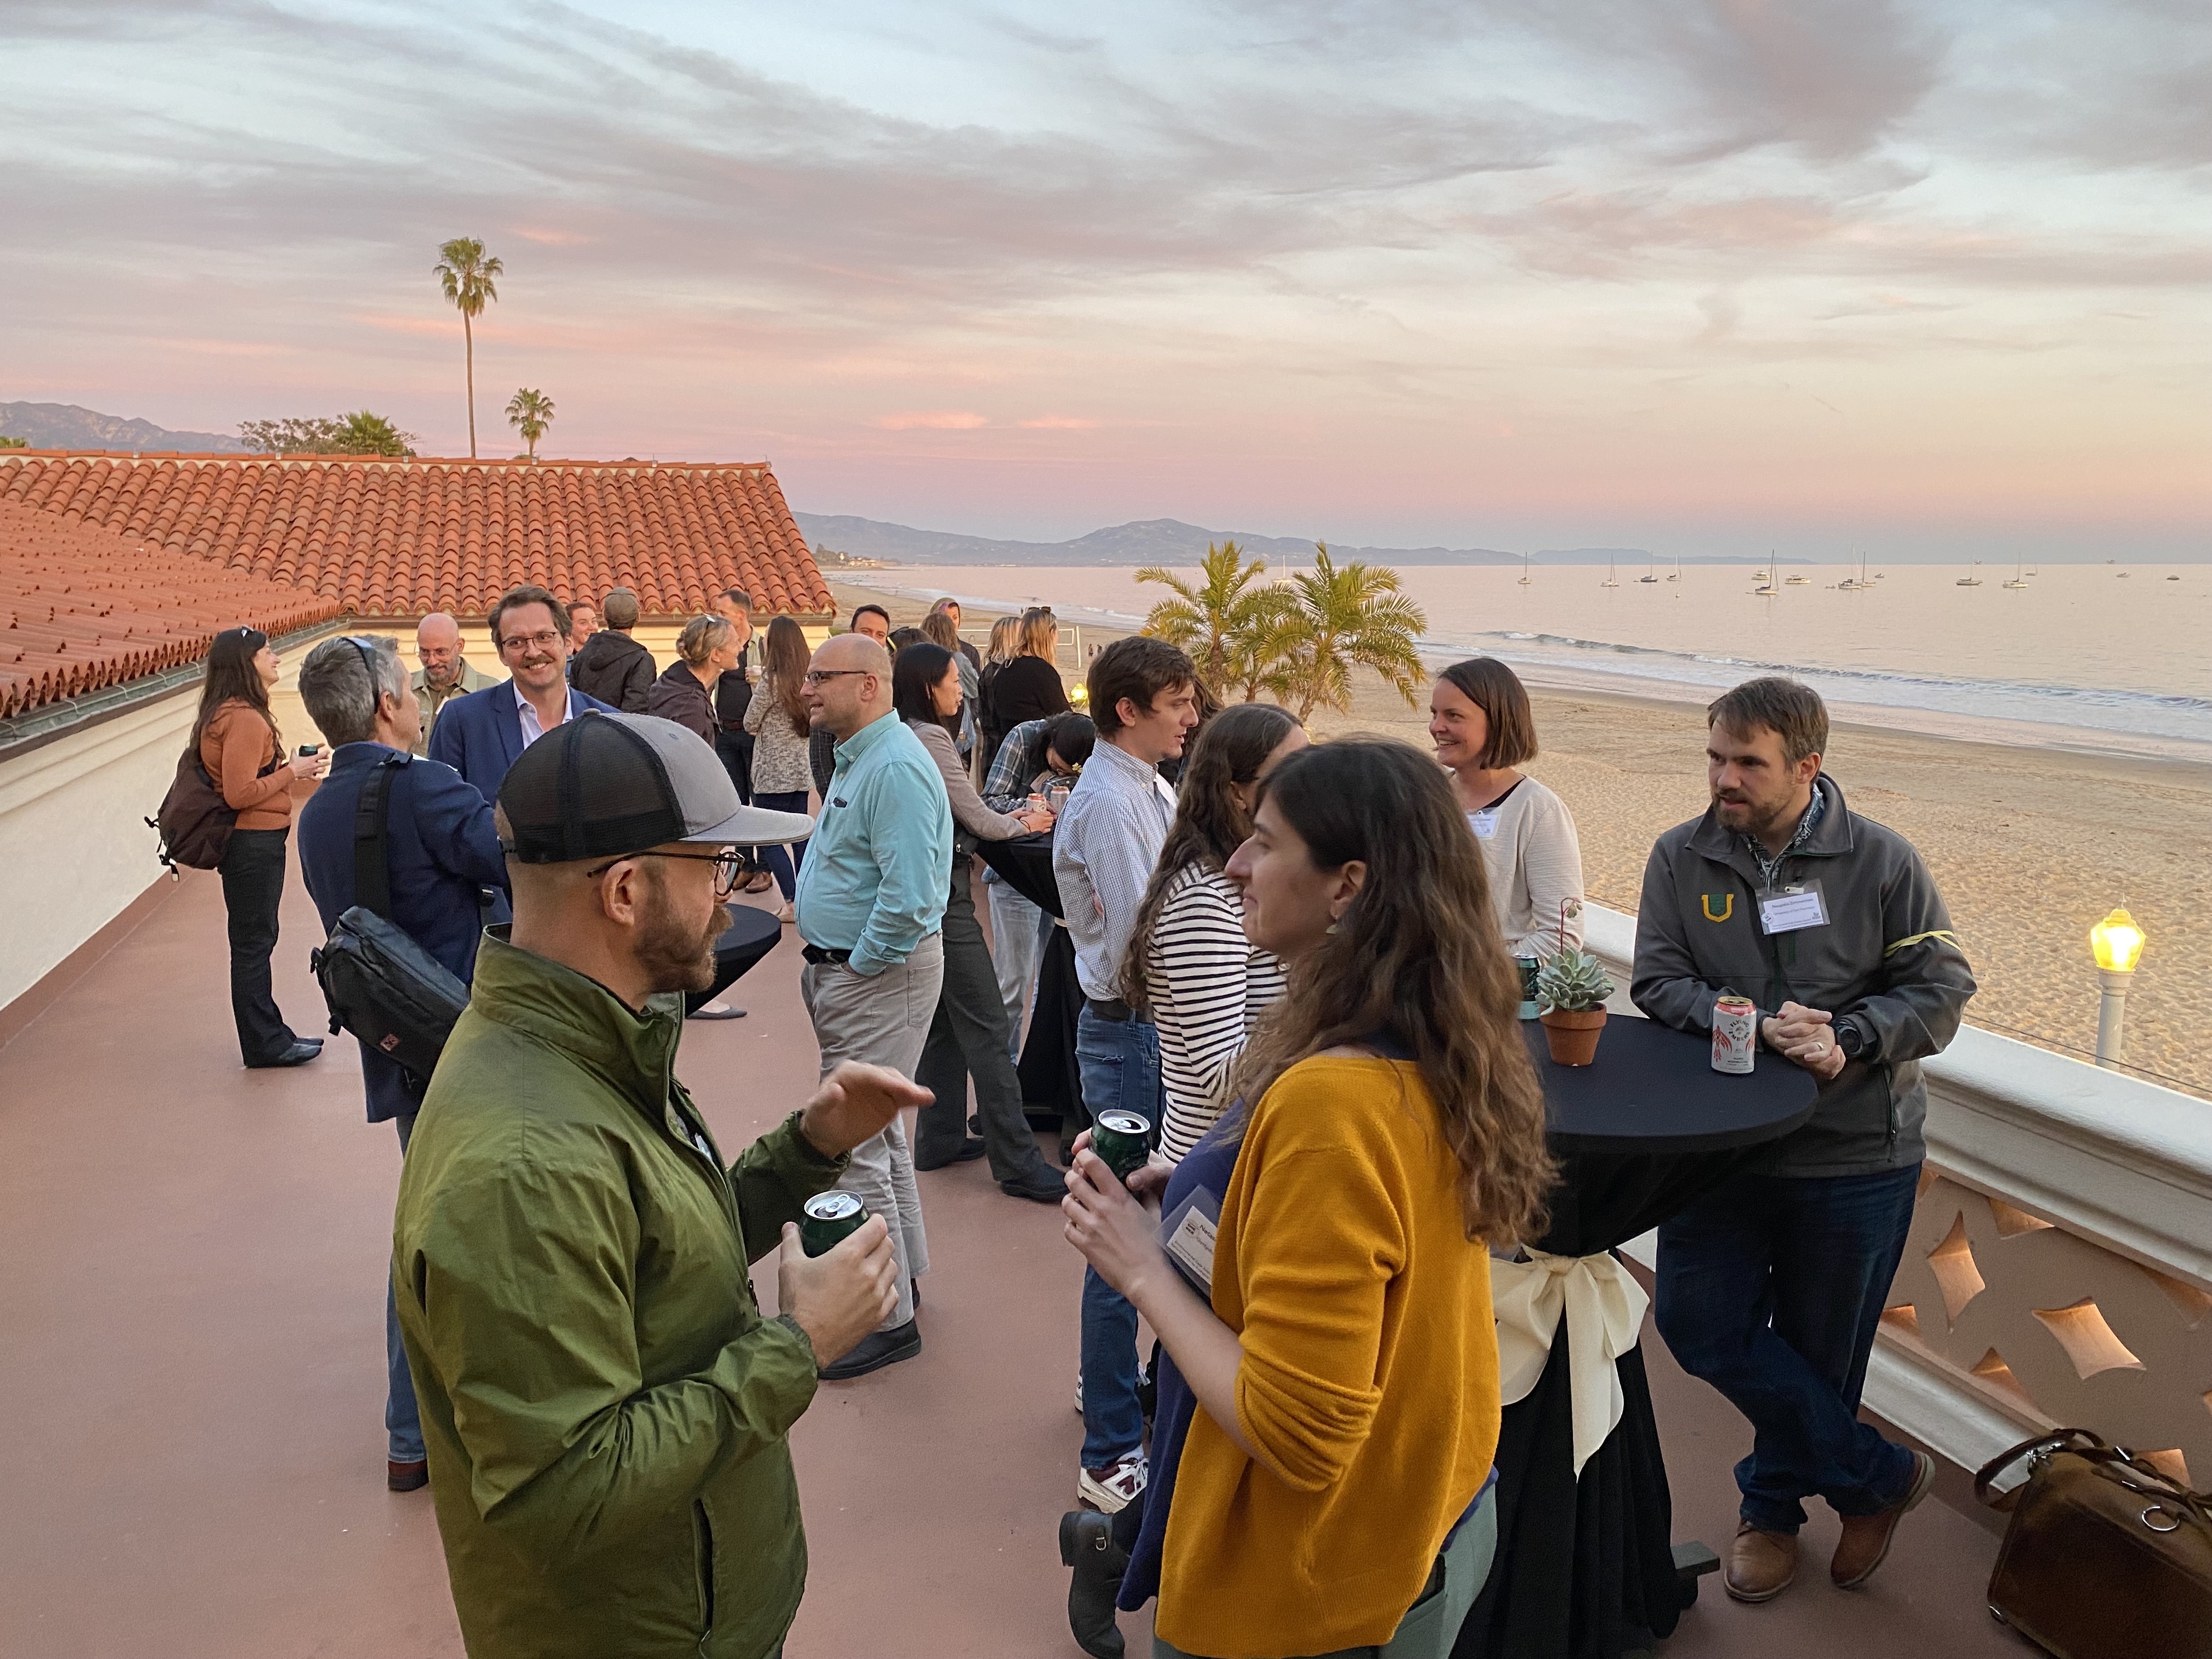 EDS Summit attendees gather for social hour on the patio of the Cabrillo Pavilion at sunset. In the background is East Beach, sailboats on the calm ocean, and a diminishing horizon line of mountainous coastline.